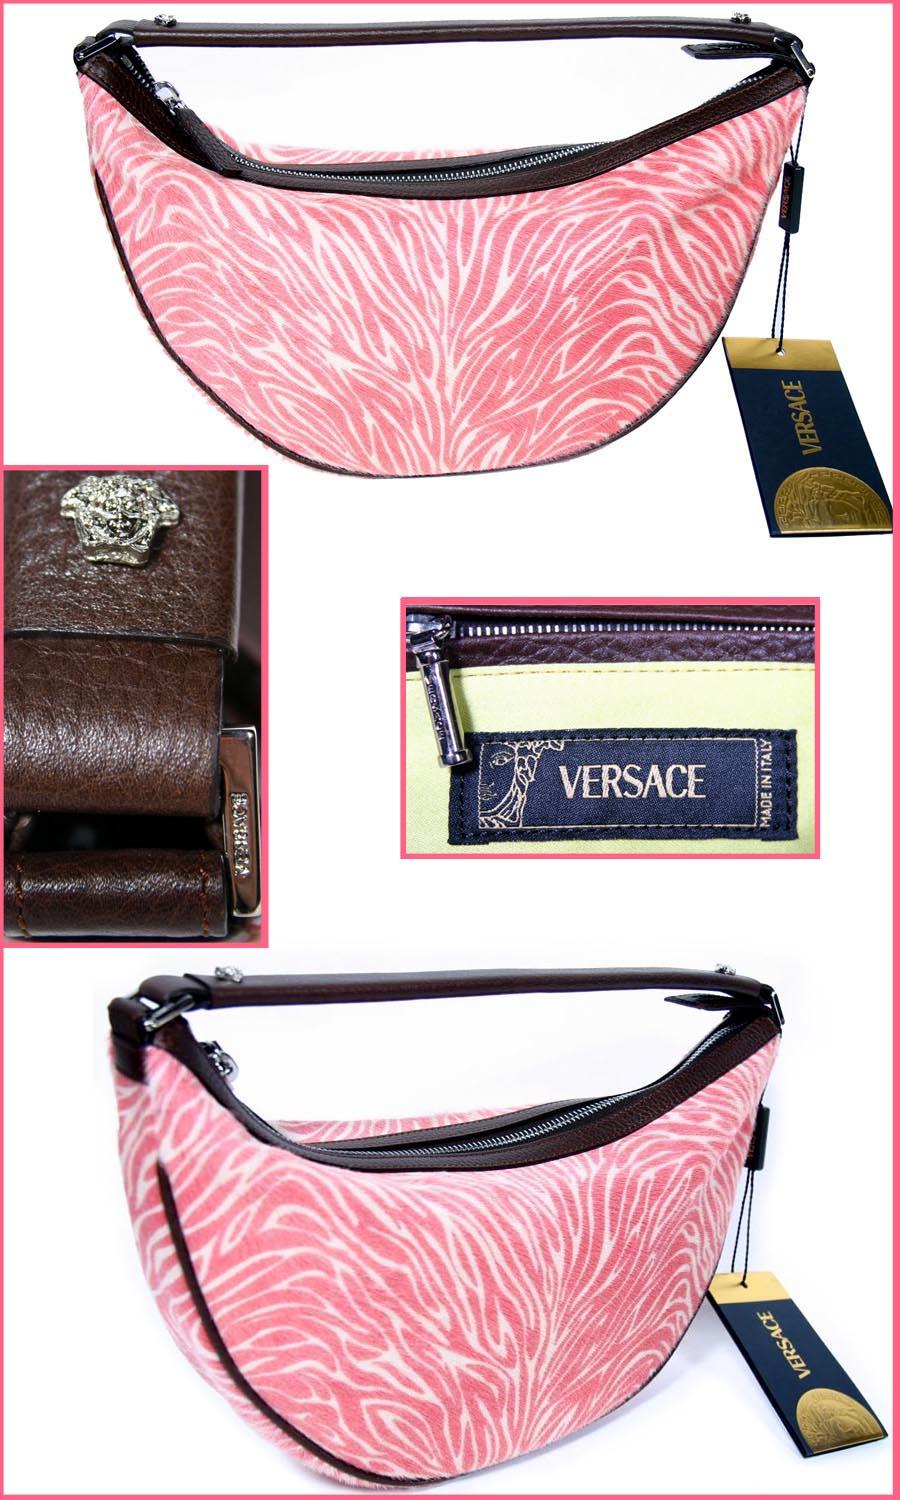 BRAND NEW VERSACE BAG

With its luxurious textures and chic silhouette, this gorgeous bag exudes contemporary glamour. In zebra-printed calf hair, finished with brown leather and silver metal hardware.

Zebra-printed calf hair with brown leather